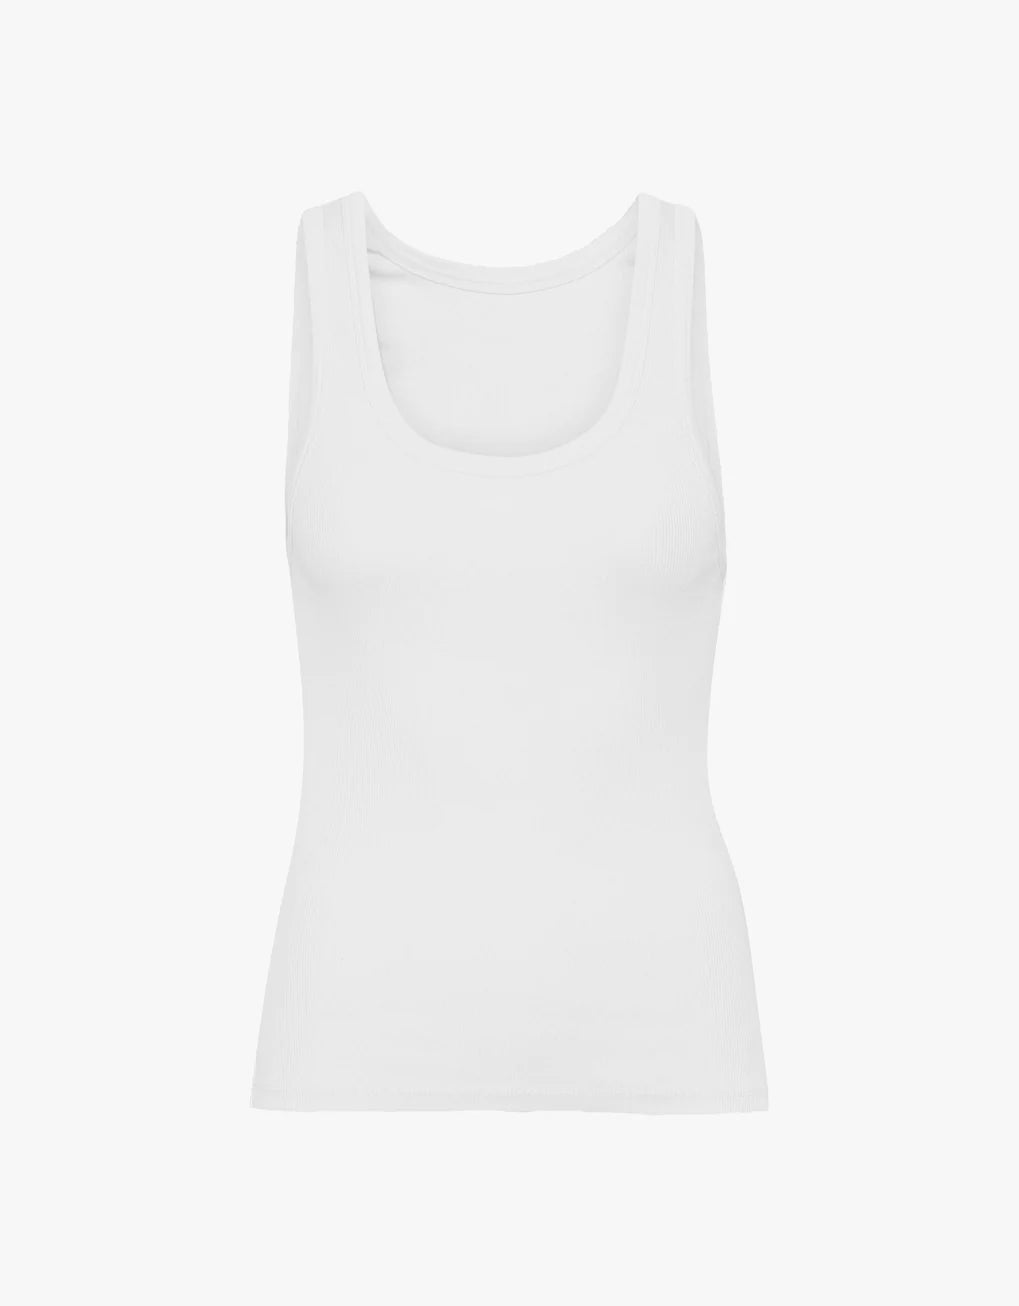 A snug and stretchy Colorful Standard Organic Rib Tank Top showcased on a white background.